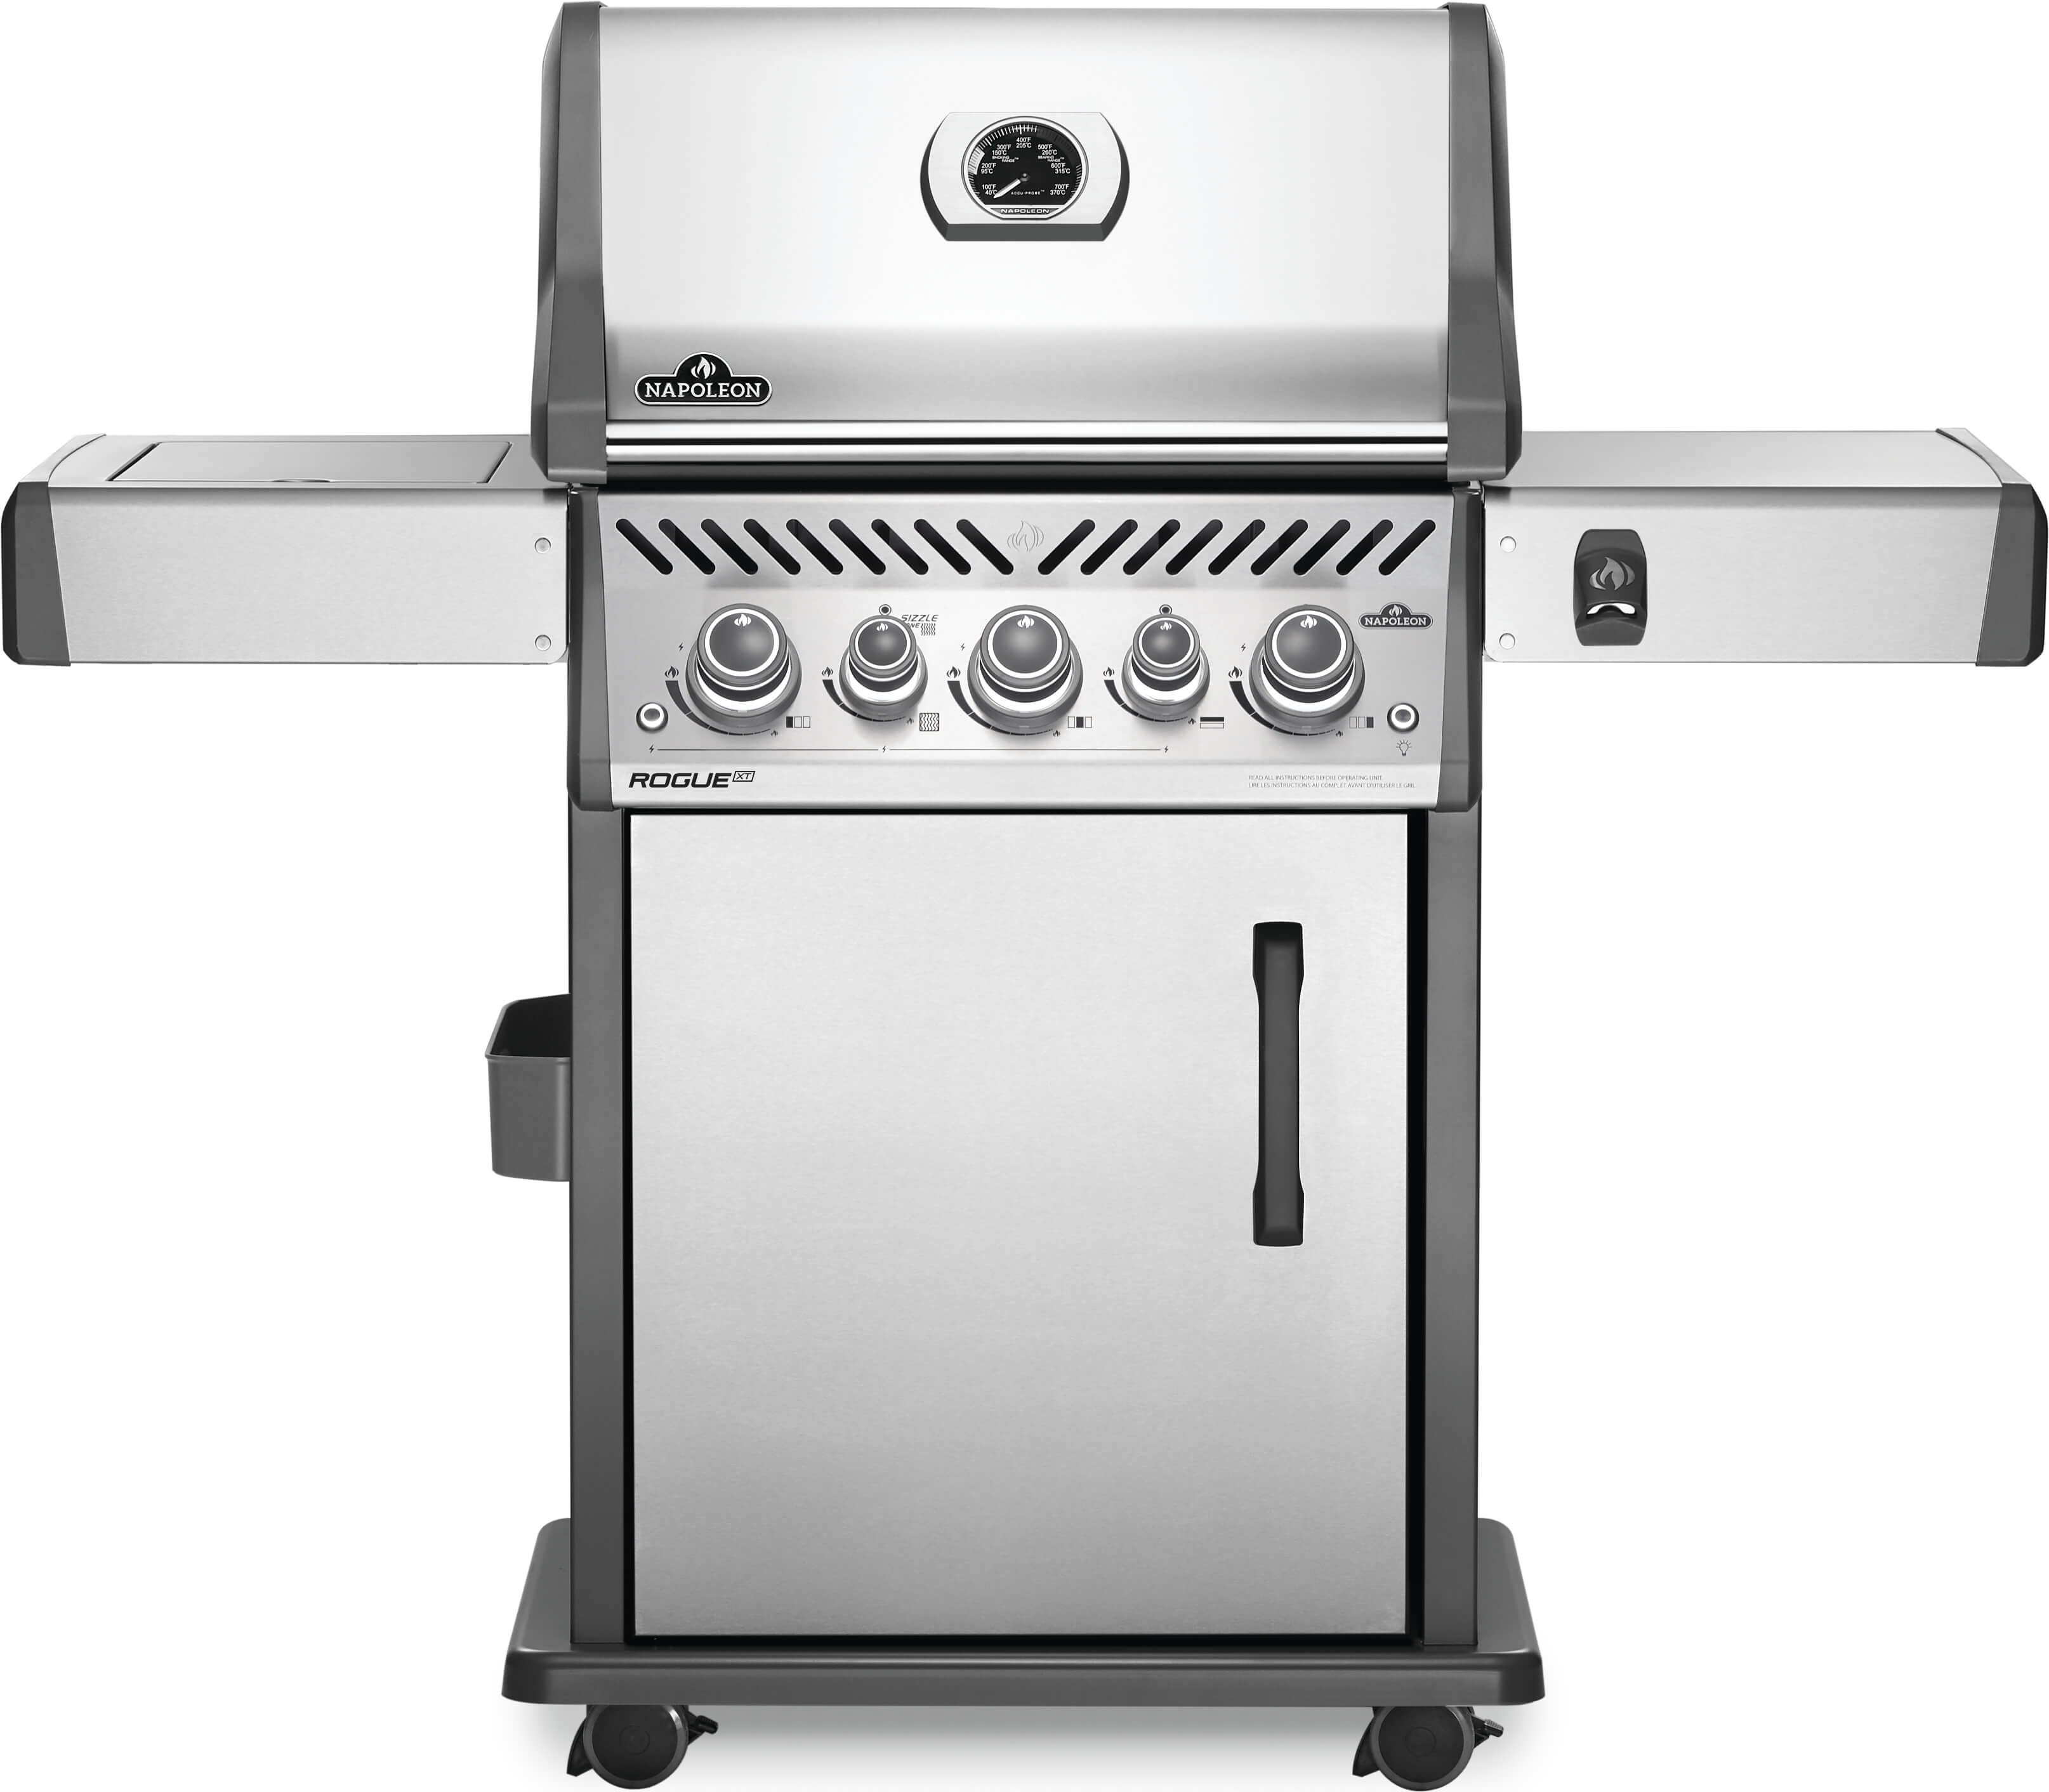 Rogue® SE 425 Natural Gas Grill with Infrared Rear and Side Burners, Stainless Steel - image 1 of 10